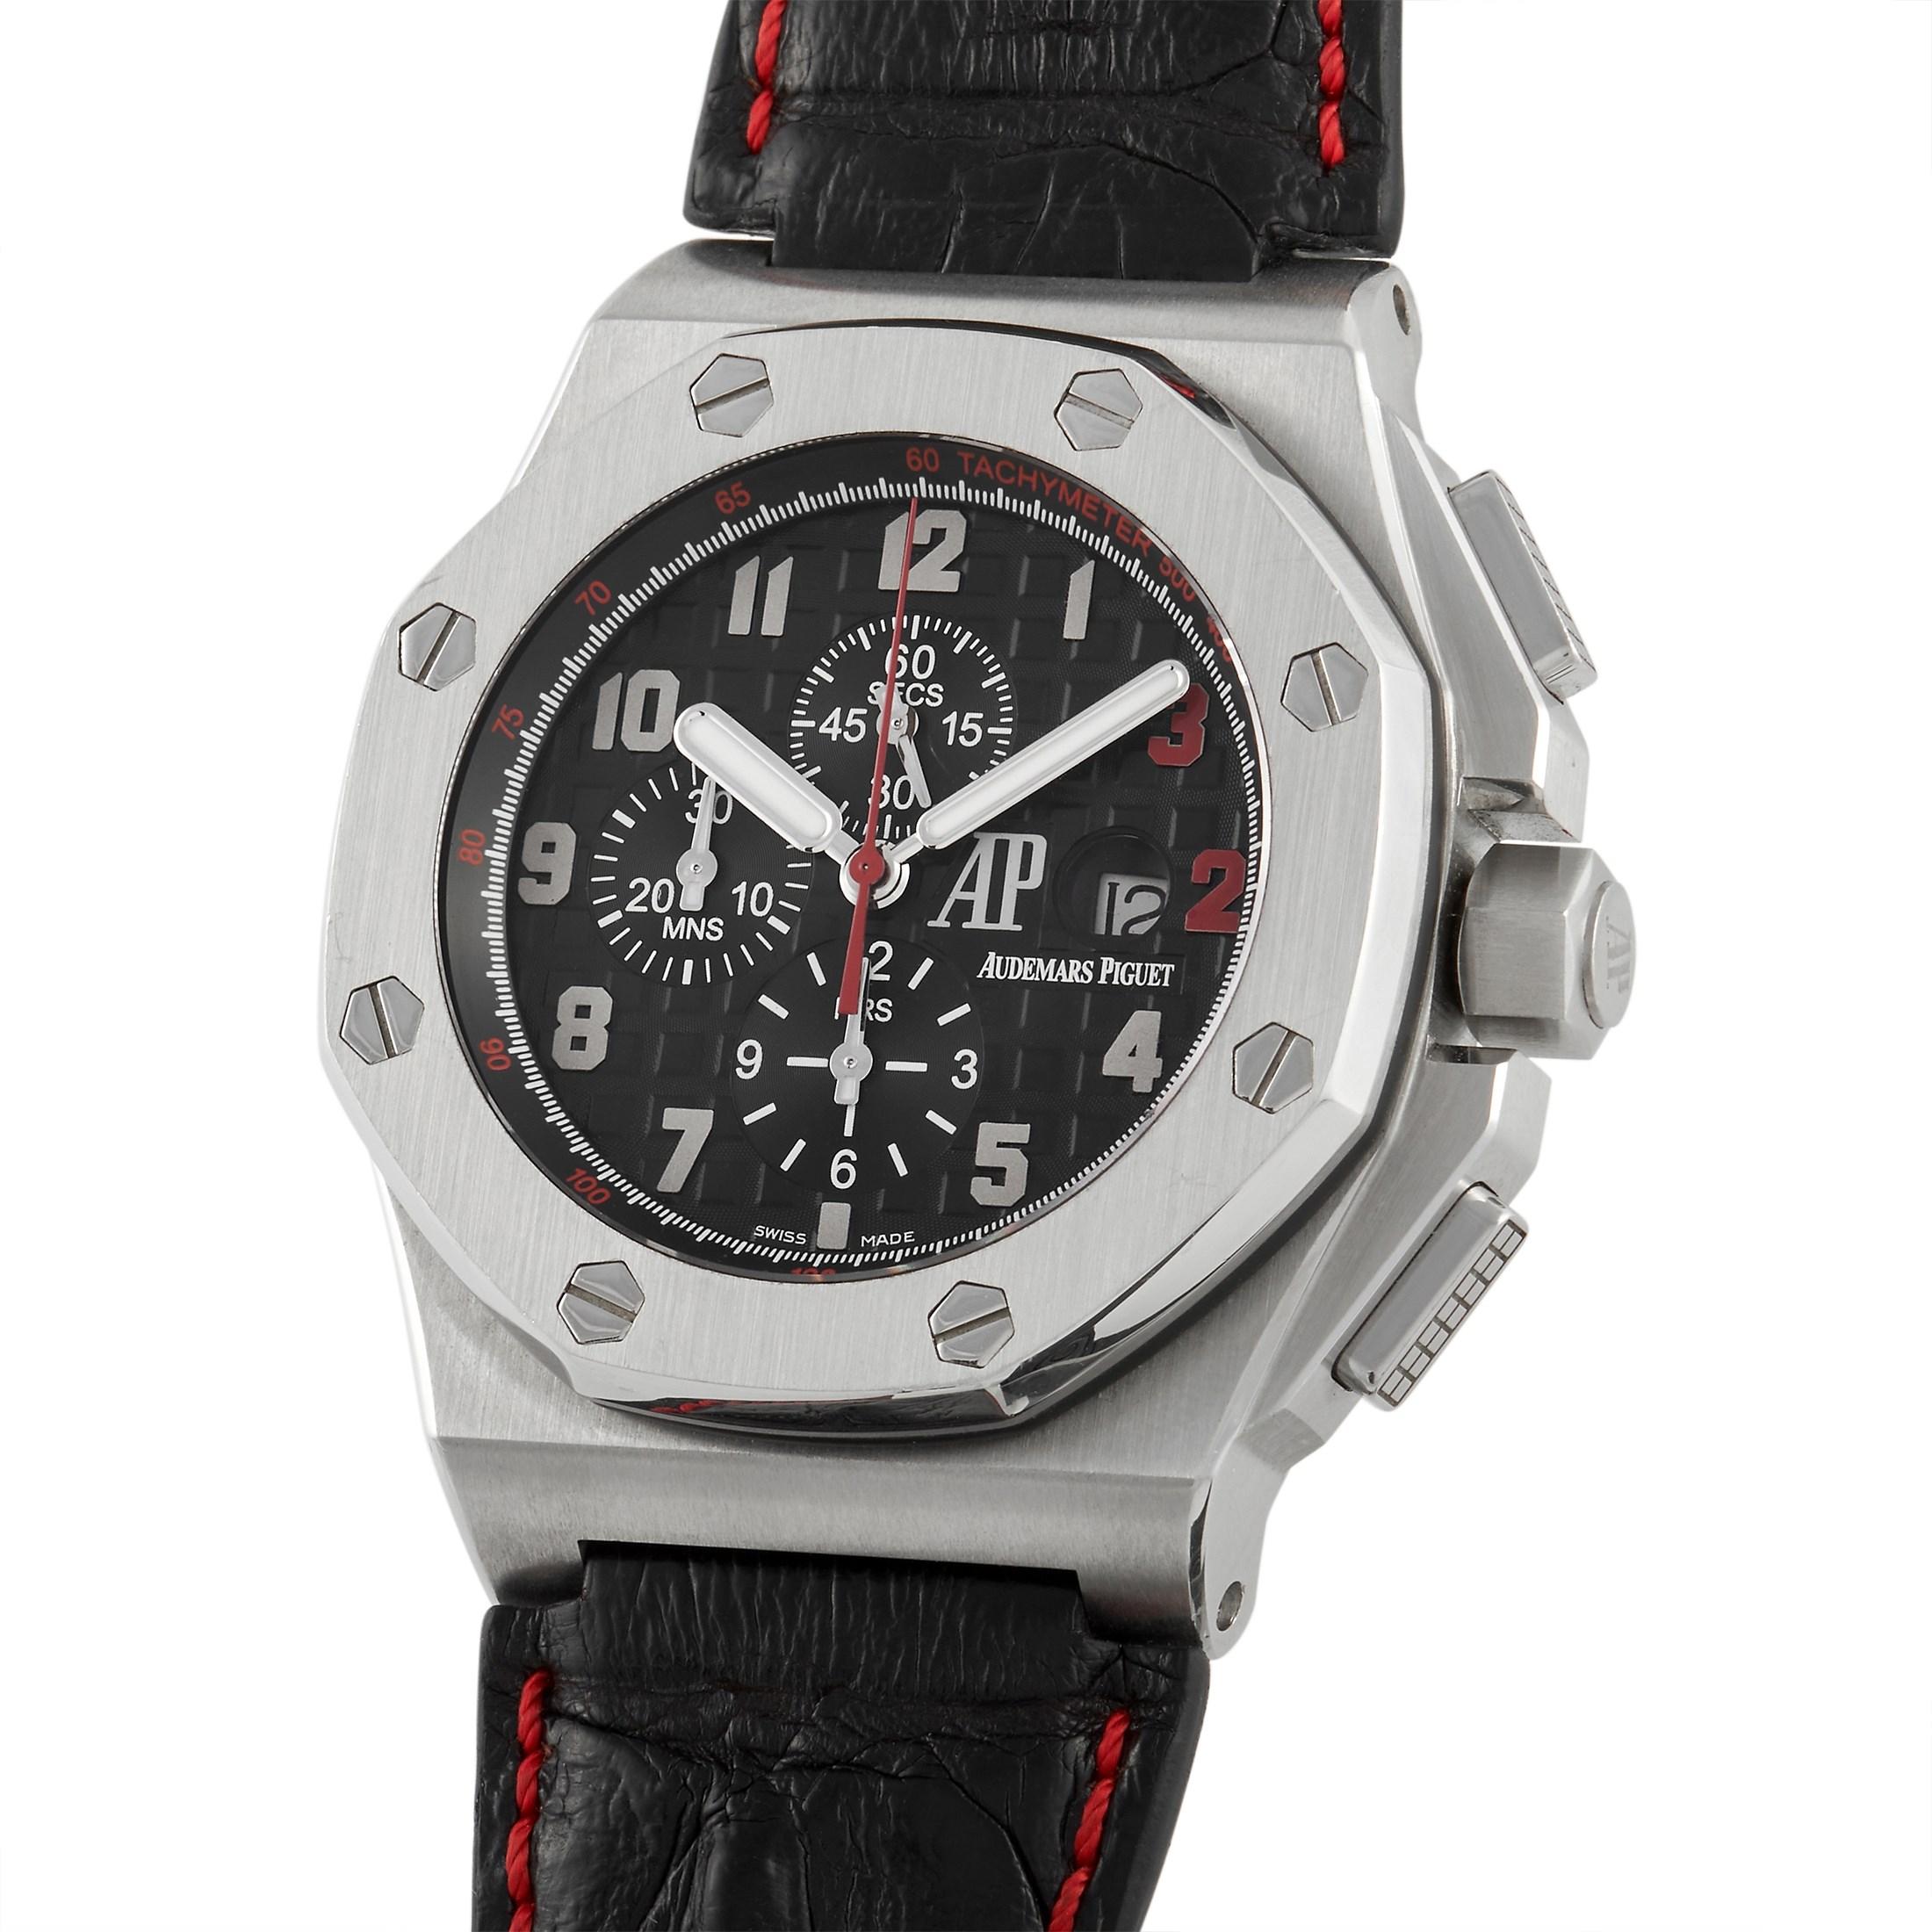 Limited edition of 960 the Shaquille O'Neal Royal Oak Offshore Chronograph watch reference number 26133ST.OO.A101CR.01, pays tribute to the great former NBA star. The stainless steel case measures 48mm and features an engraved case-back with the